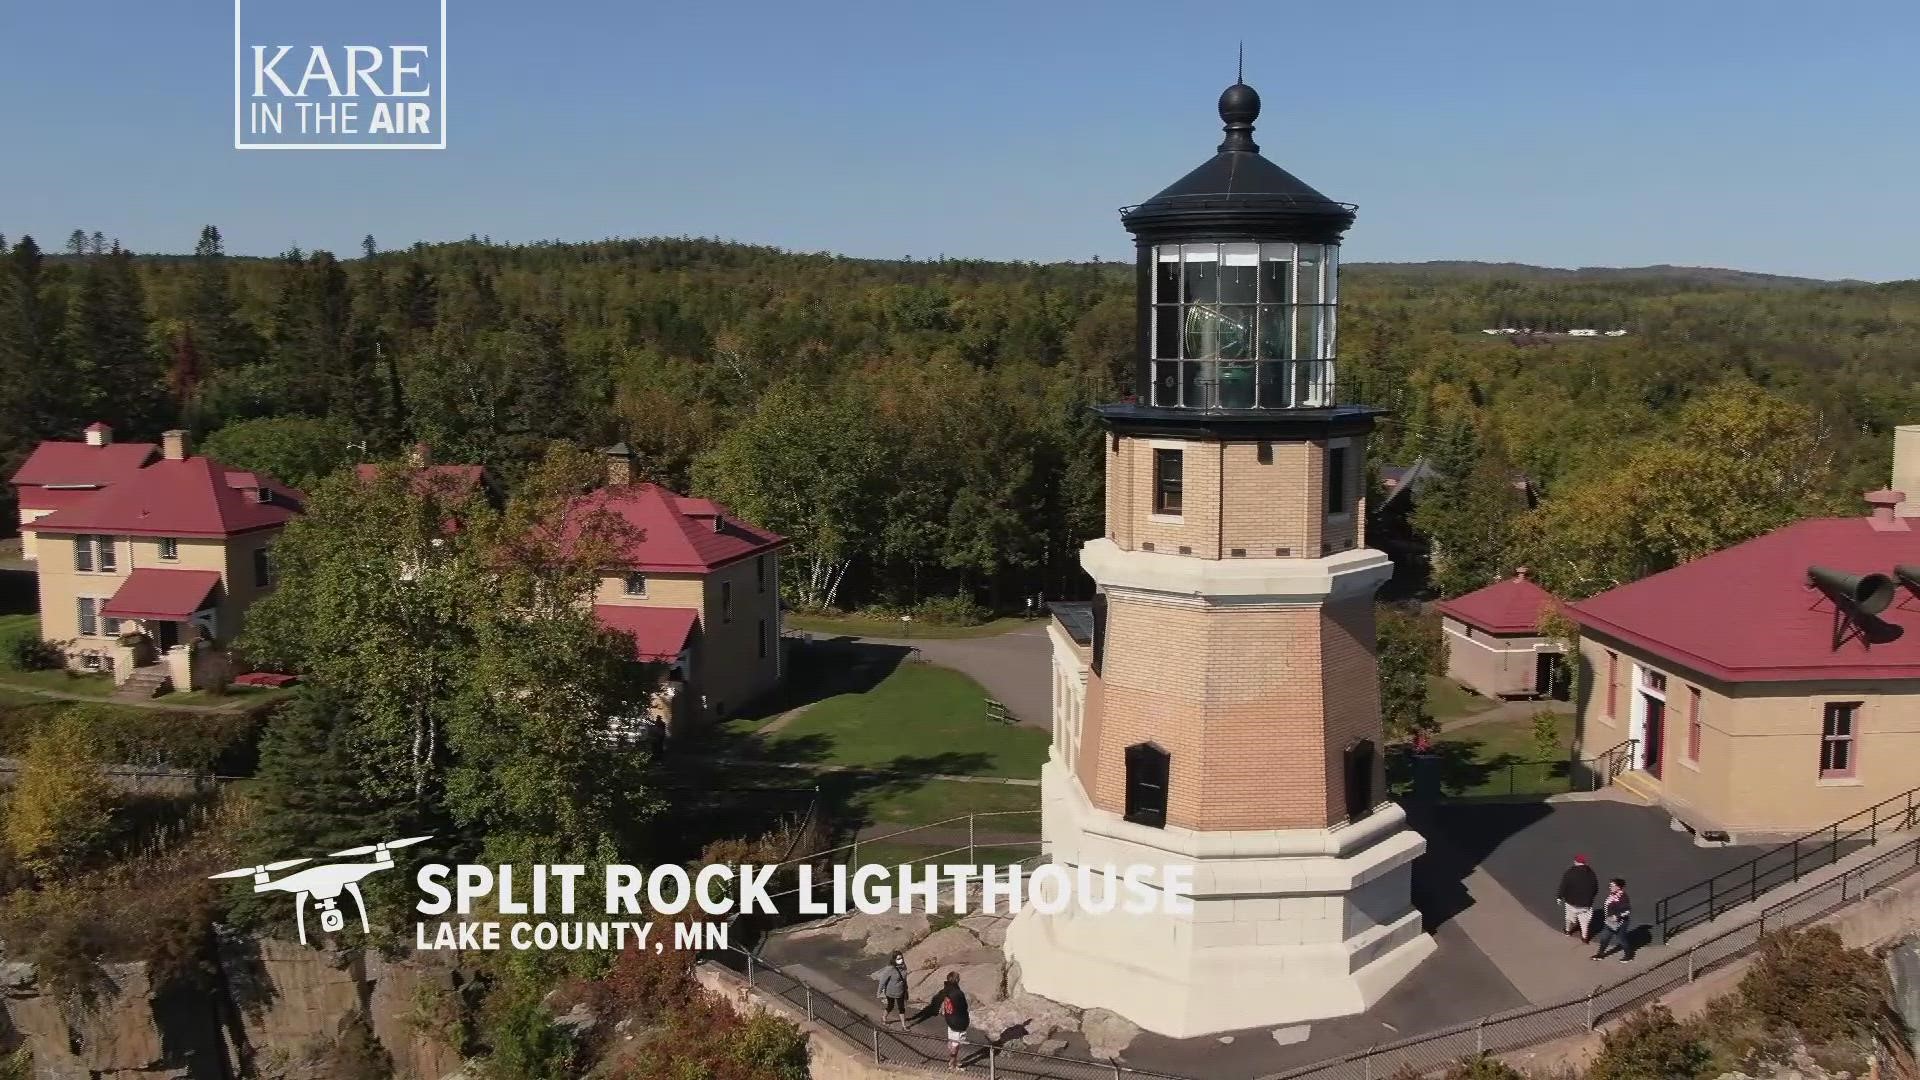 Perched on a 130-foot cliff, Split Rock Lighthouse began guiding ships through the stormy waters of Lake Superior all the back in 1910.